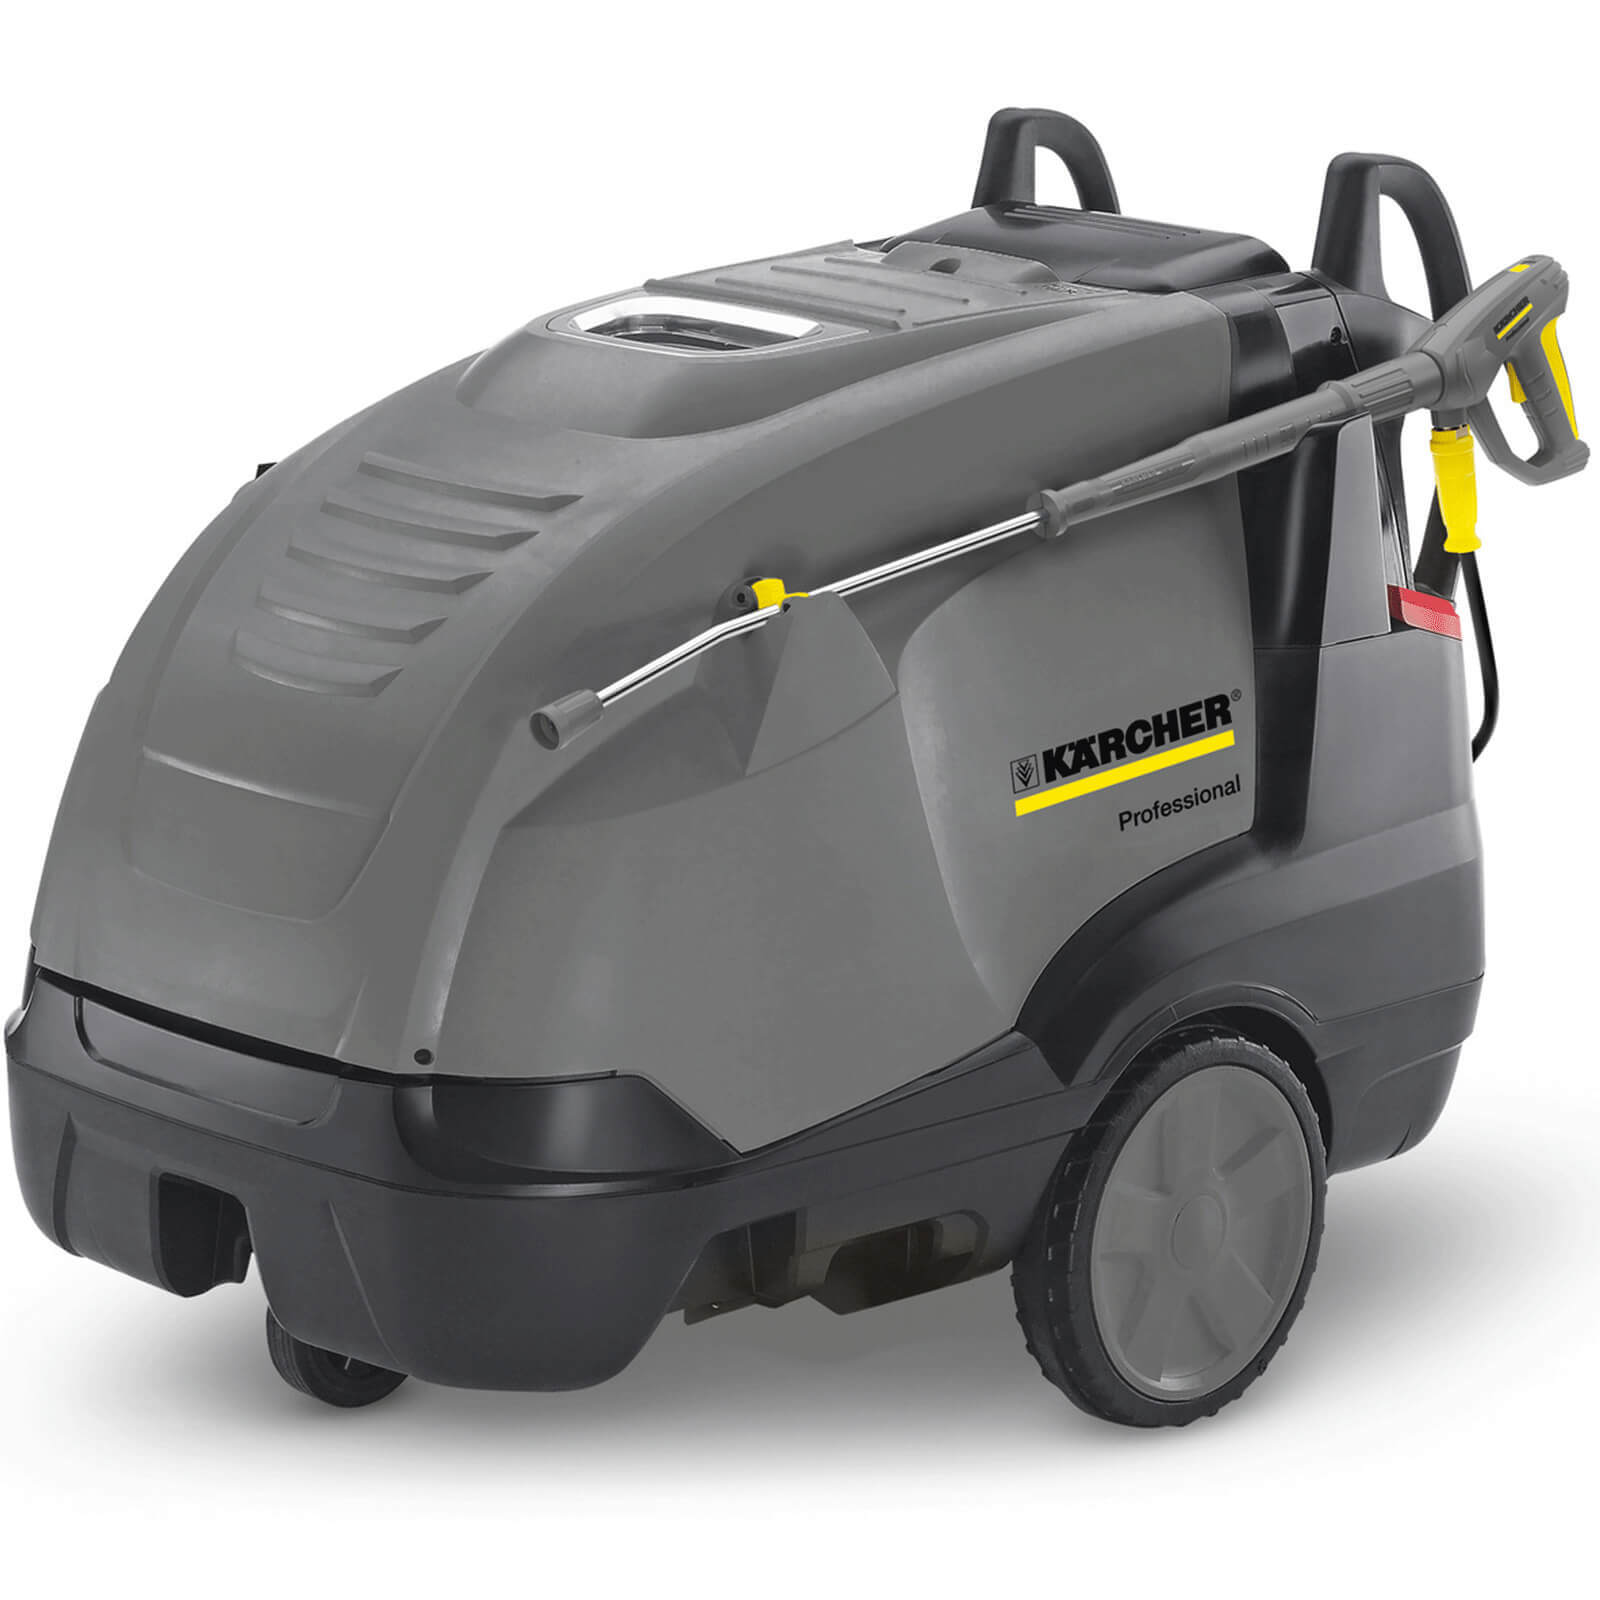 Image of Karcher HDS 7/10-4 MX Professional Hot Water Steam Pressure Washer 100 Bar